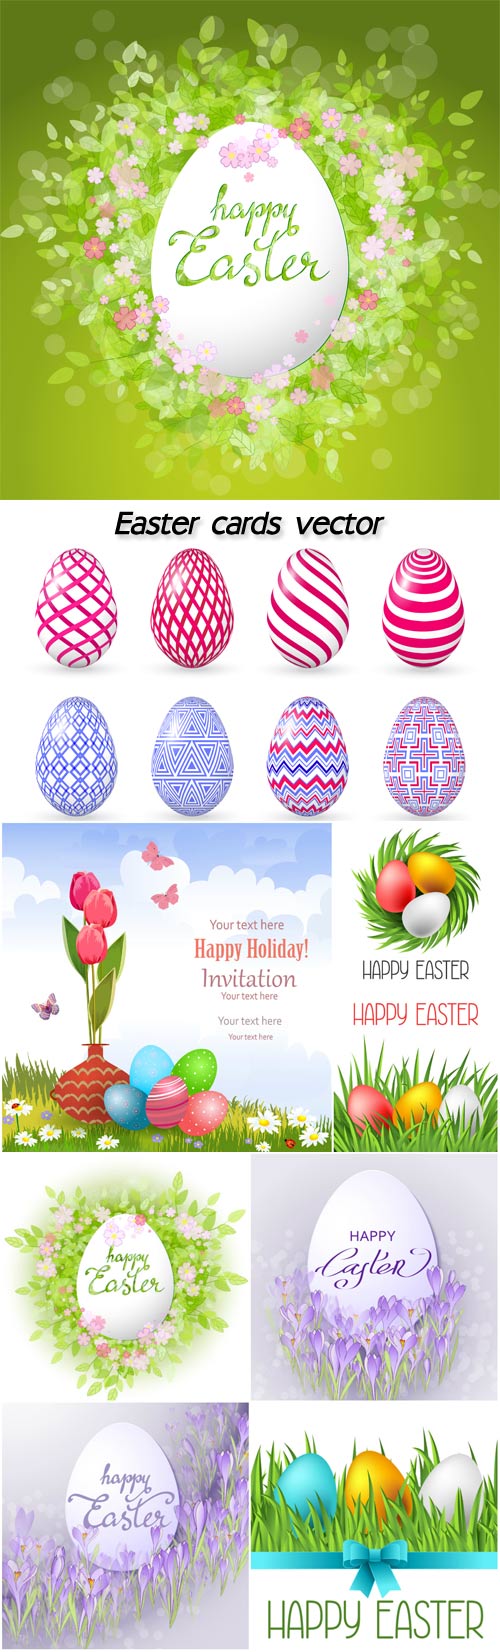 Easter cards vector, spring flowers